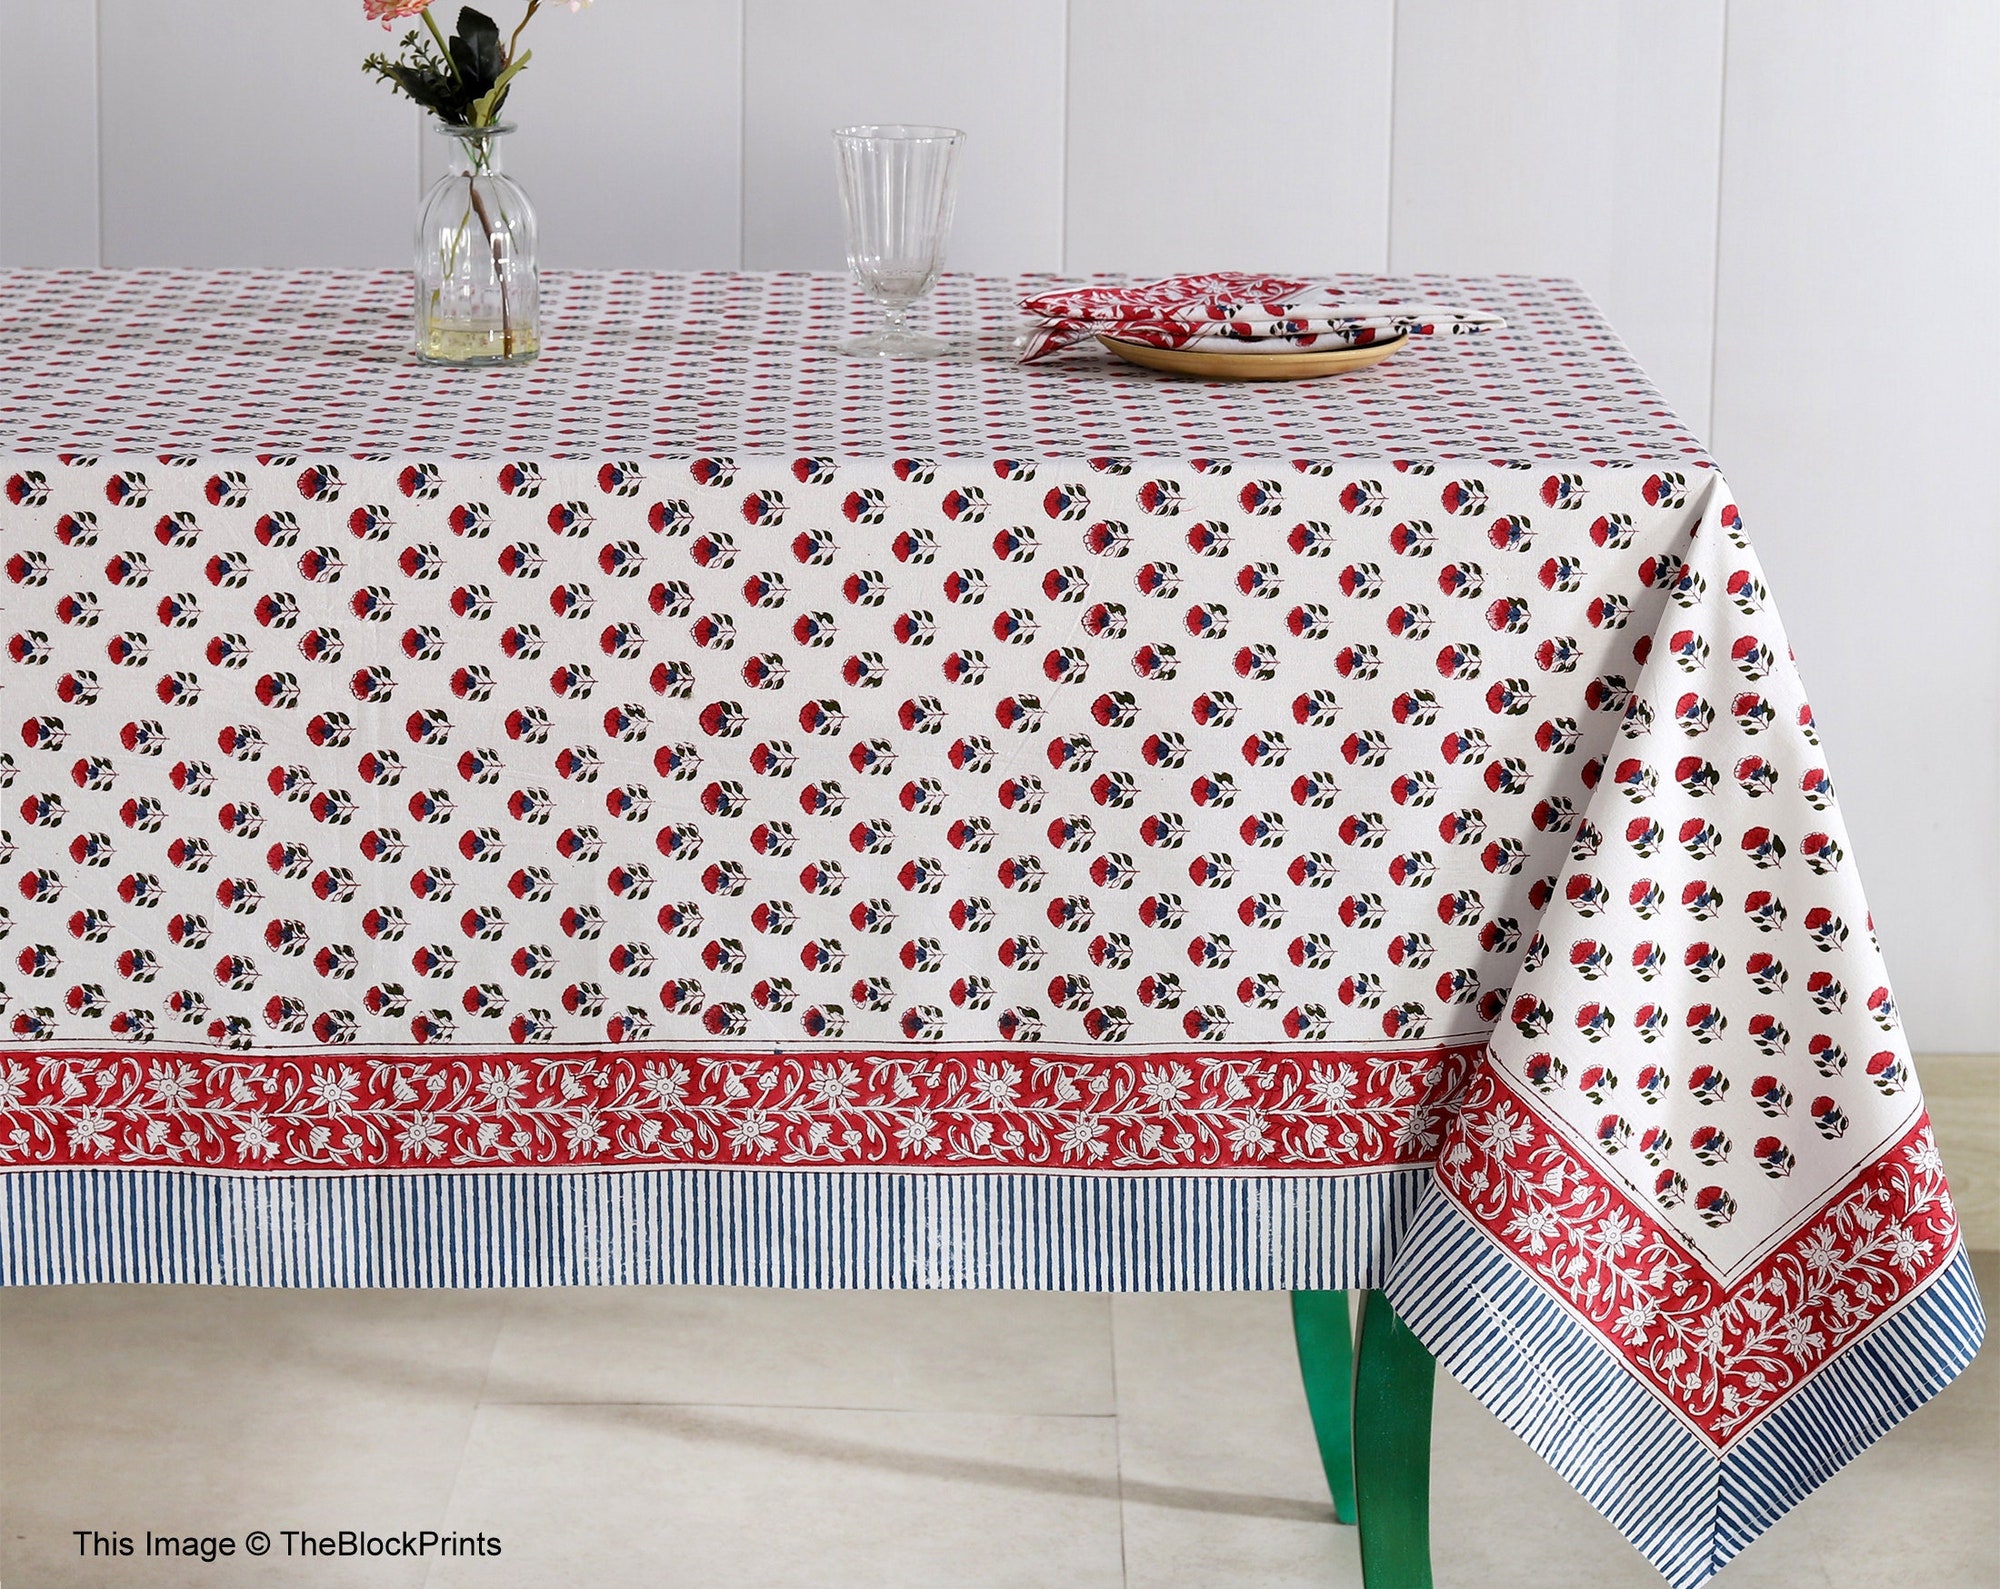 Floral Tablecloth Cover, Block Printed Tablecloth